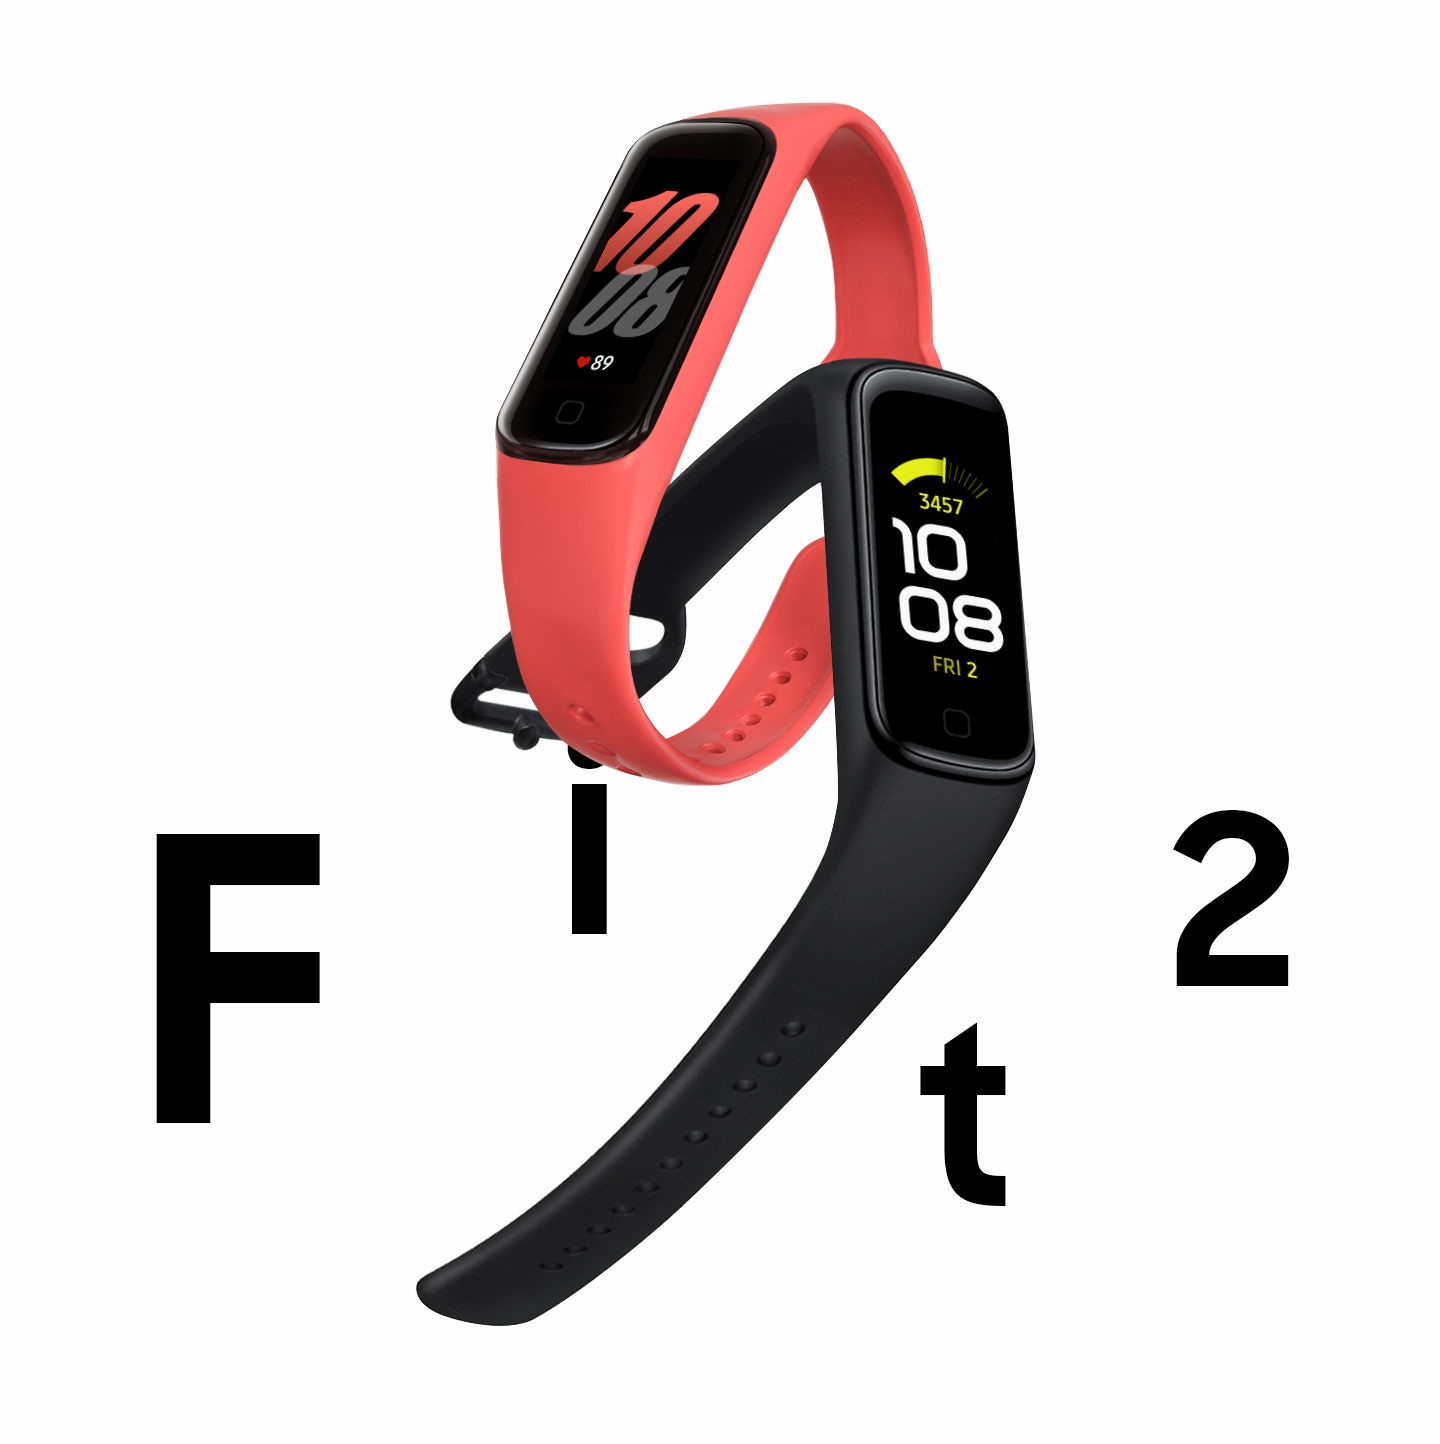 Focus on your health with Galaxy Fit2